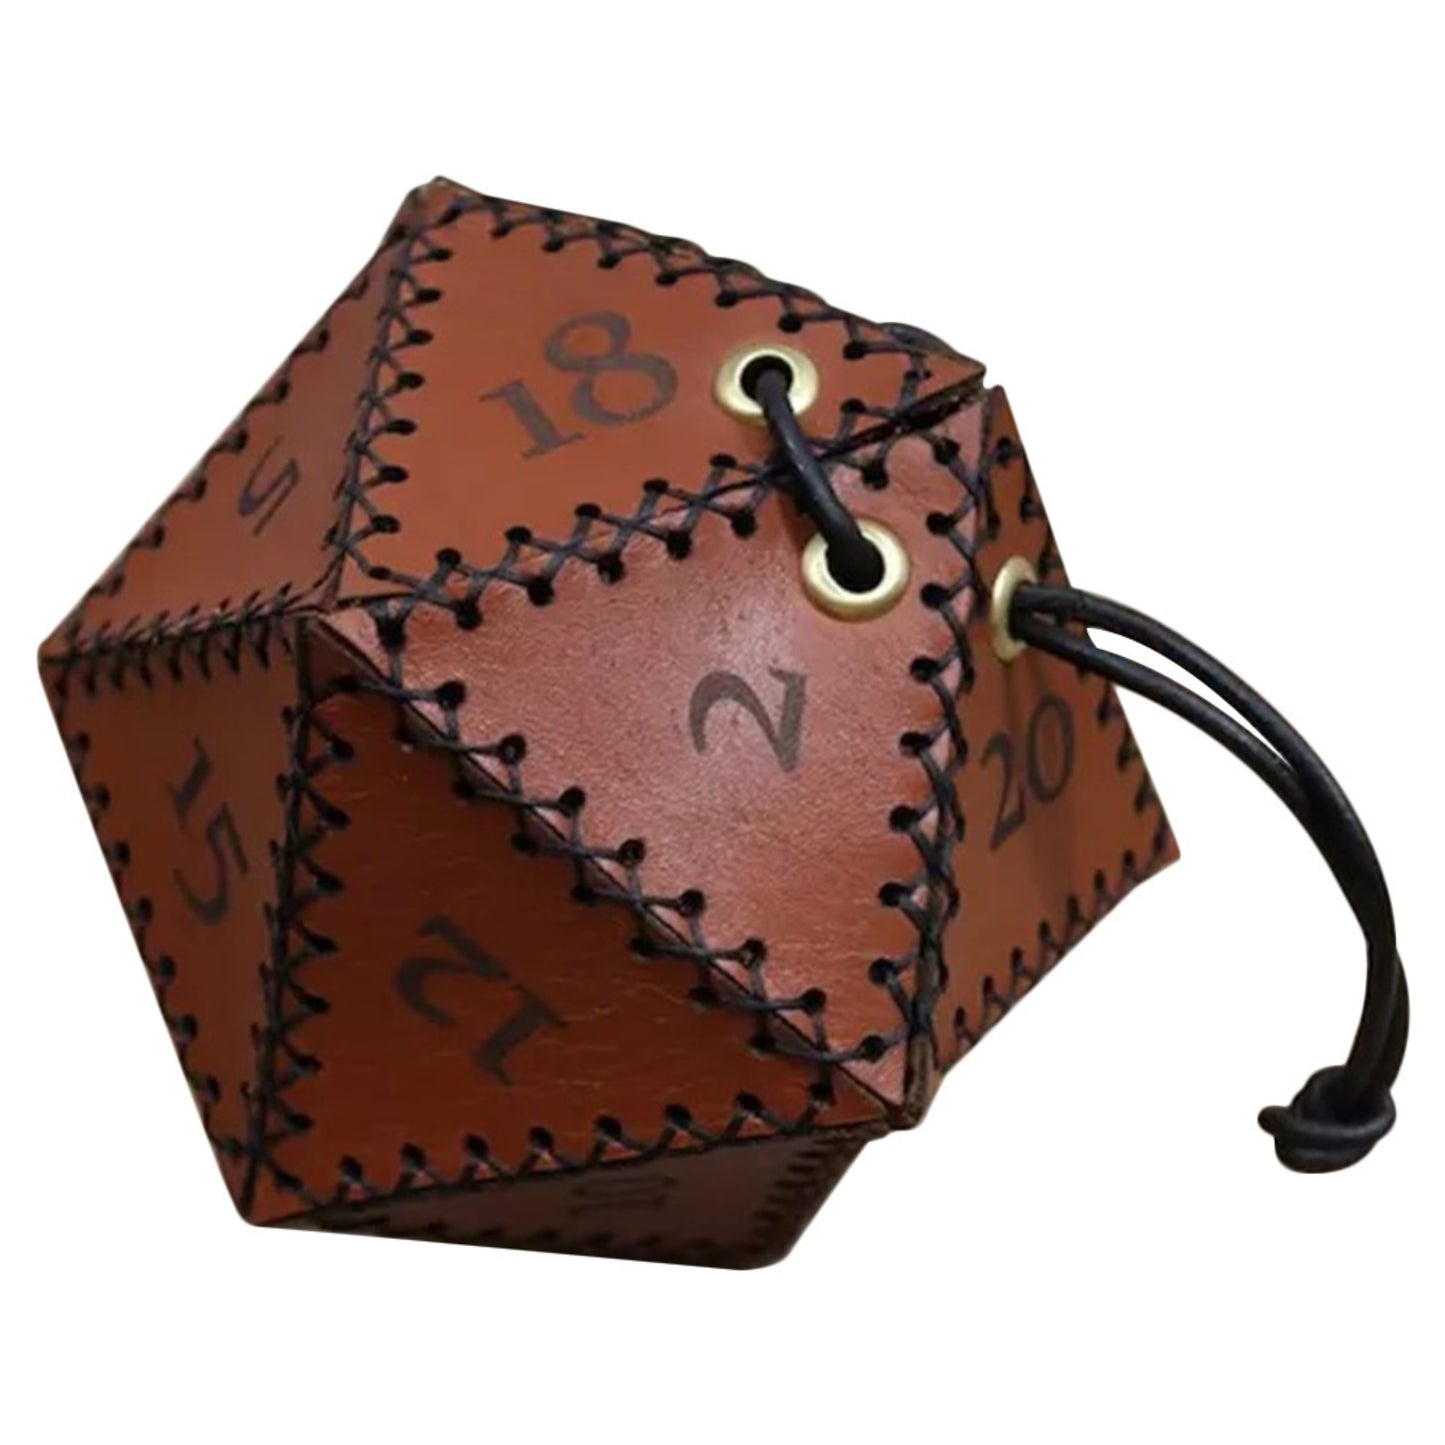 Synthetic Leather Polygonal Game Dice Storage Bag